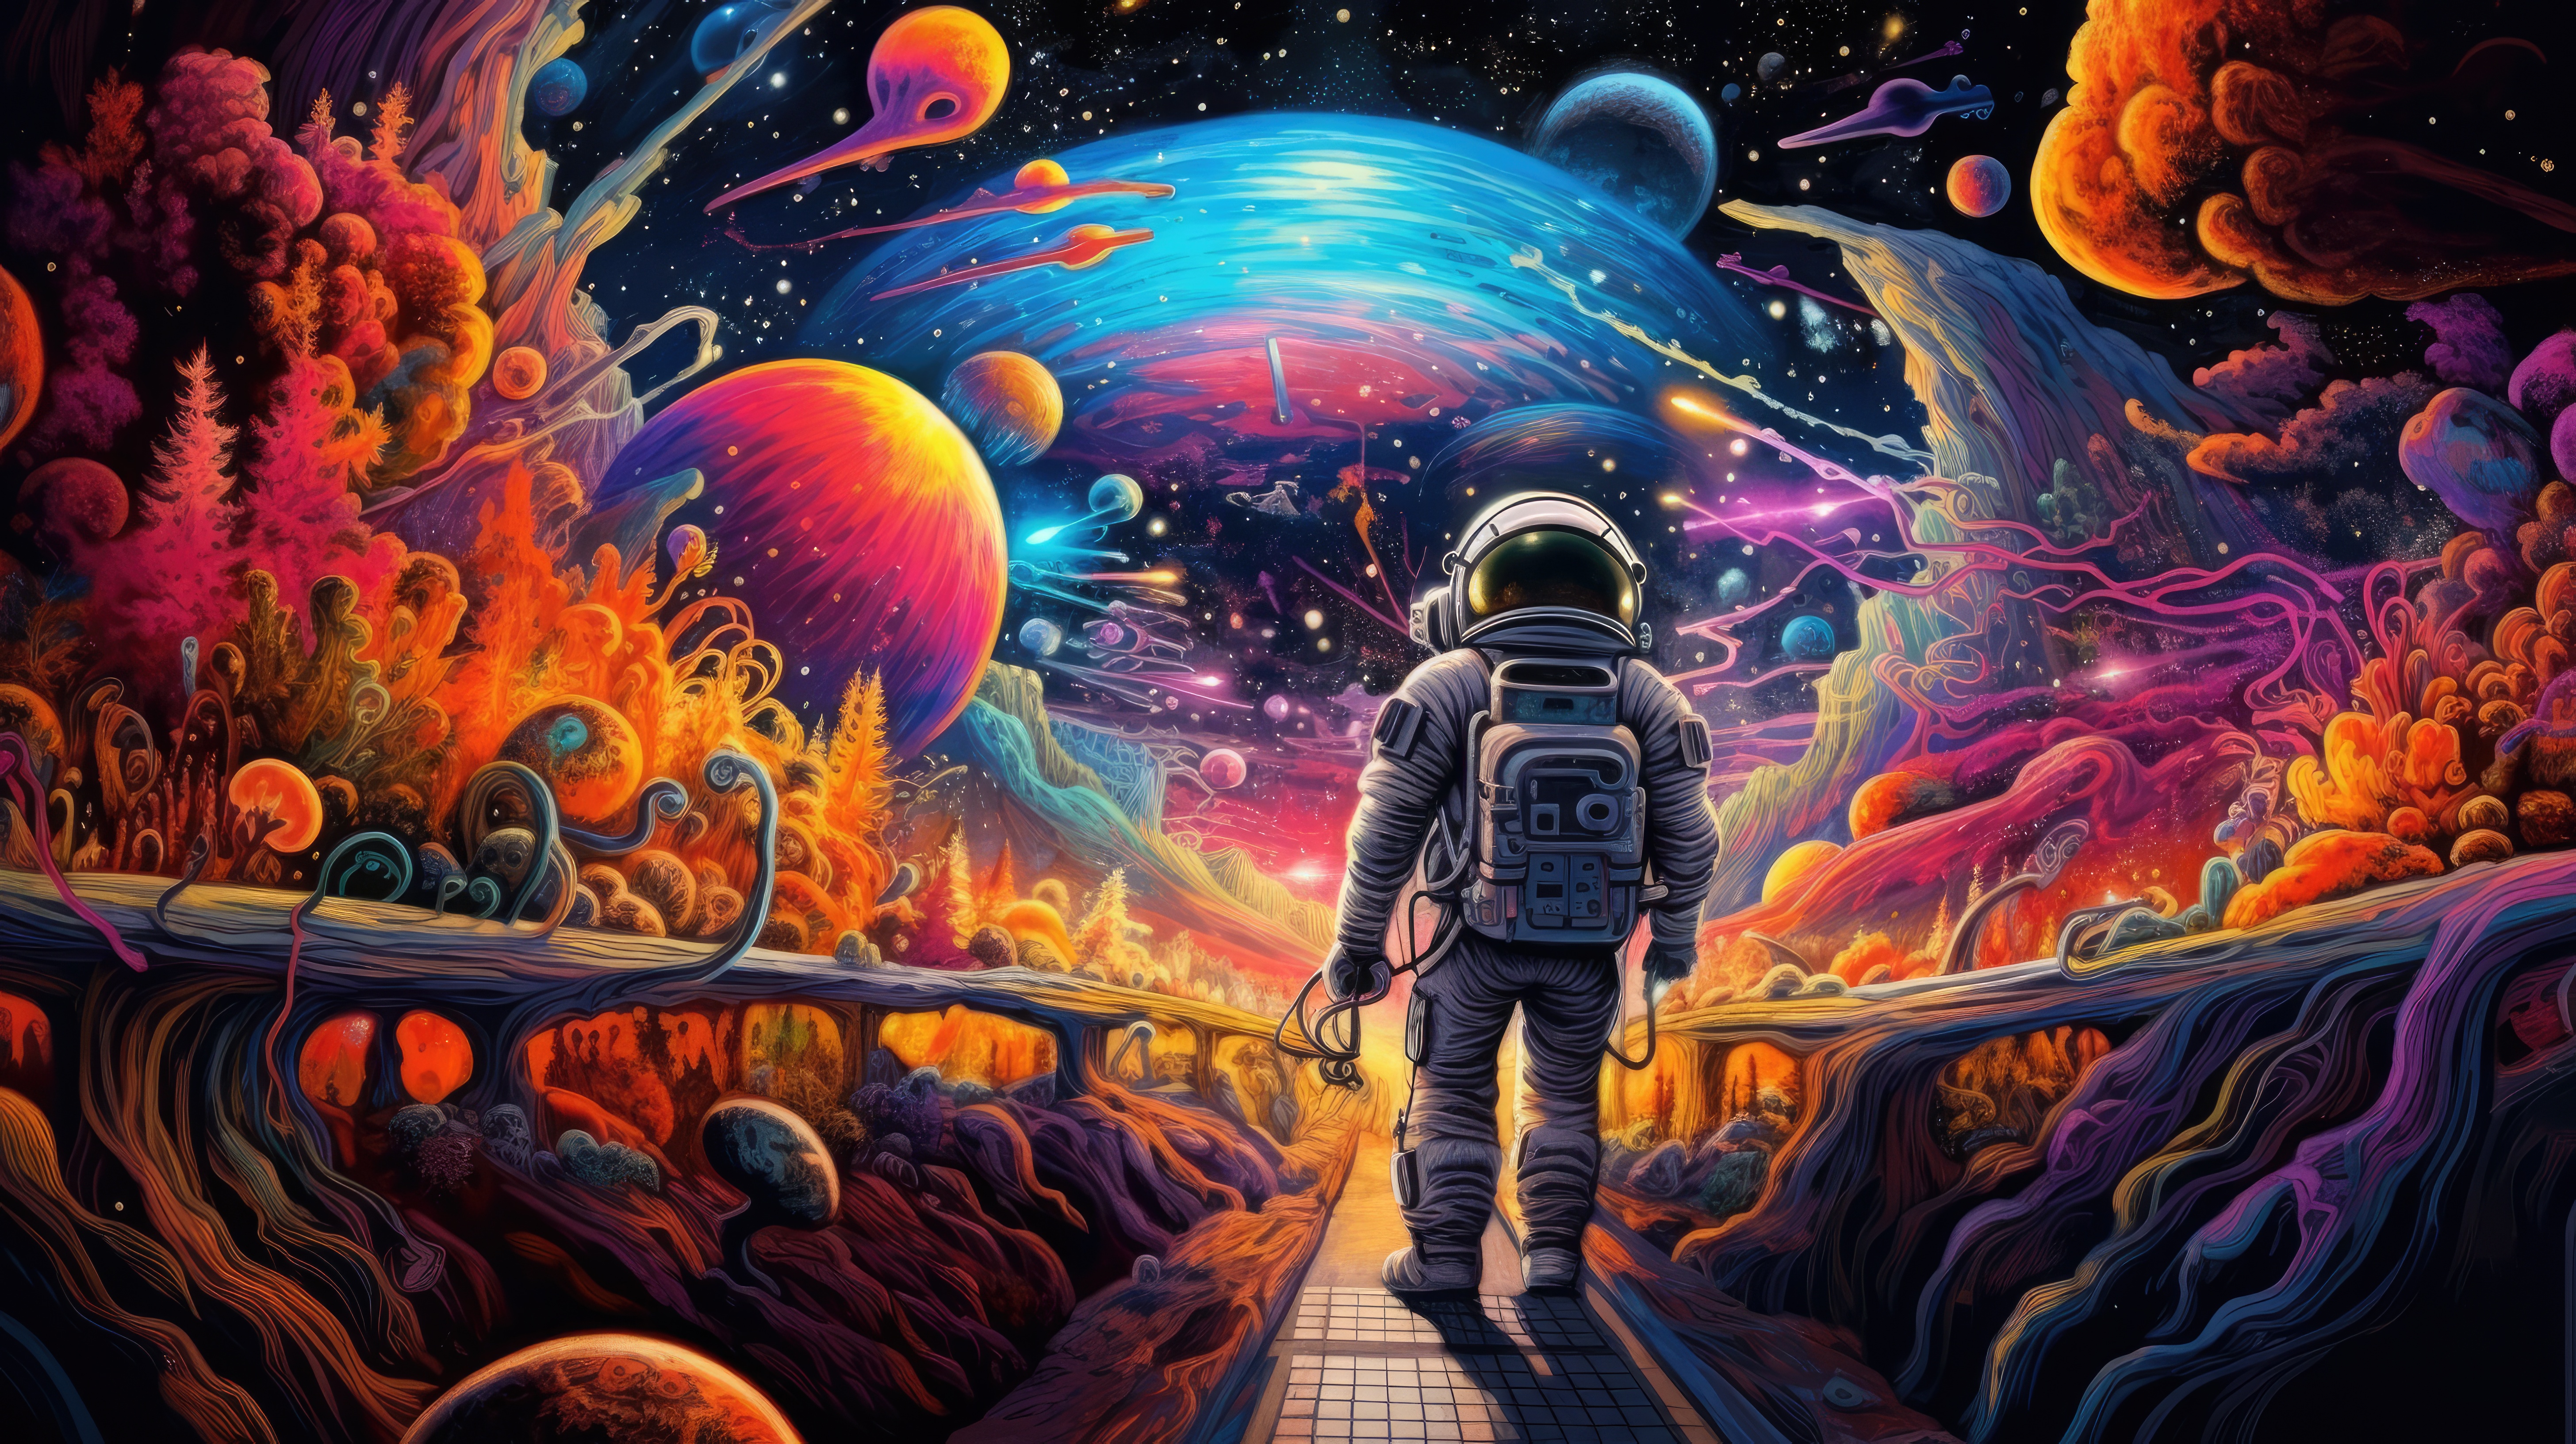 Trippy Astronaut in Space Wallpapers  Top Free Trippy Astronaut in Space  Backgrounds  WallpaperAccess  Nebula wallpaper Galaxy wallpaper Astronaut  wallpaper